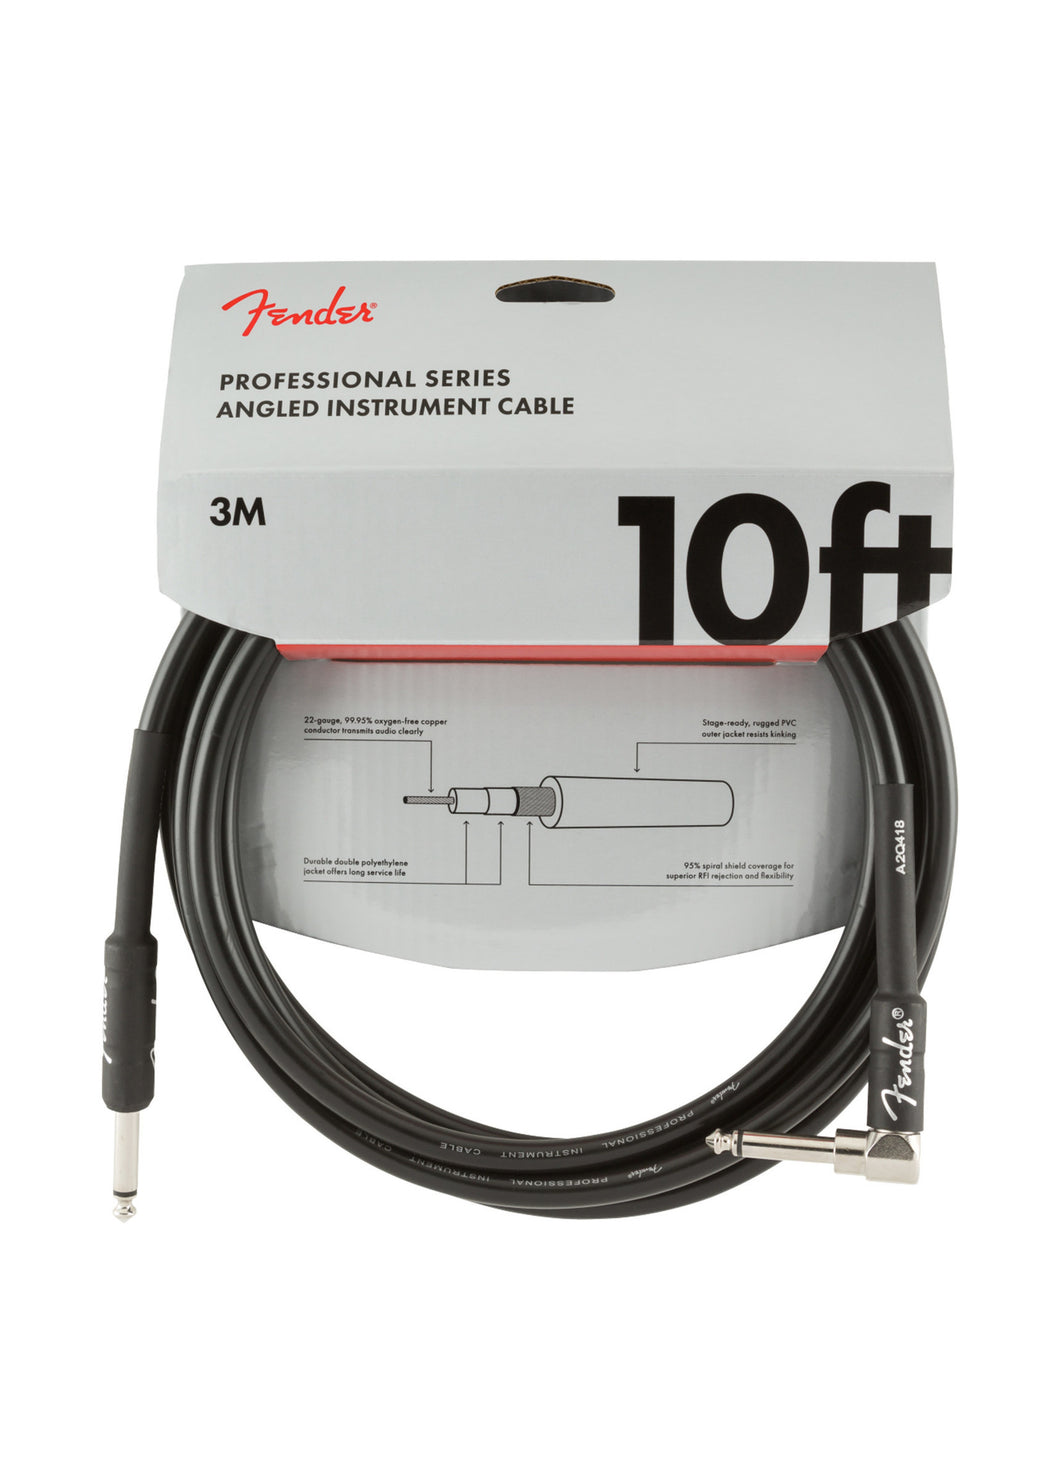 10ft Instrument Cable with Angled Tip Fender professional Series